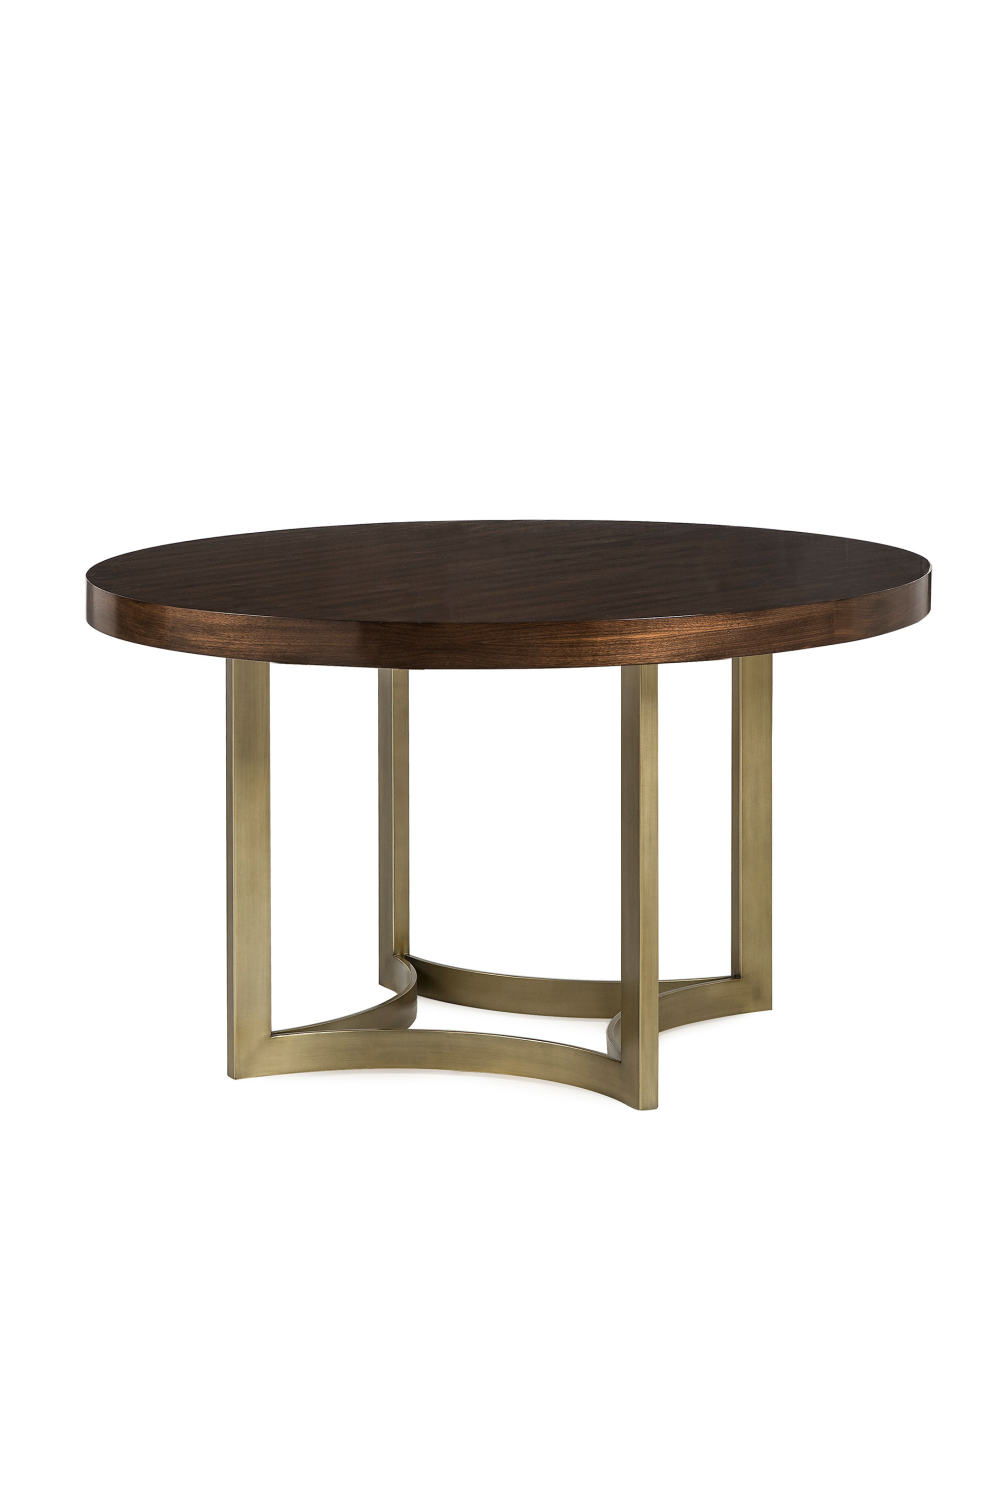 Warm Walnut Round Dining Table | Andrew Martin Chester | OROA